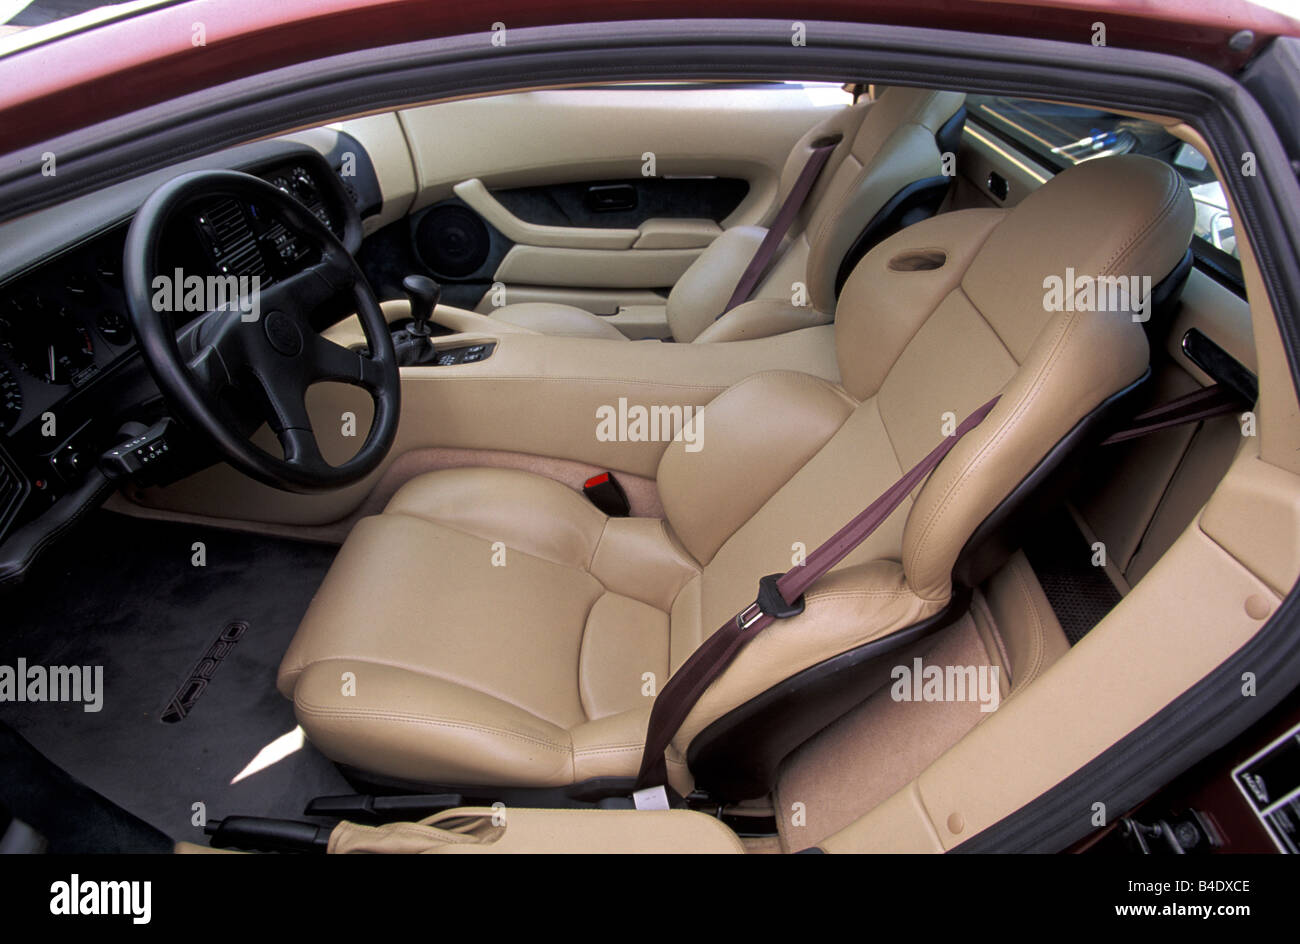 Car, Jaguar XJ 220, model year 1994, wine-red-metallic, coupe/Coupe, roadster, interior view, Interior view, seats, Front seat, Stock Photo